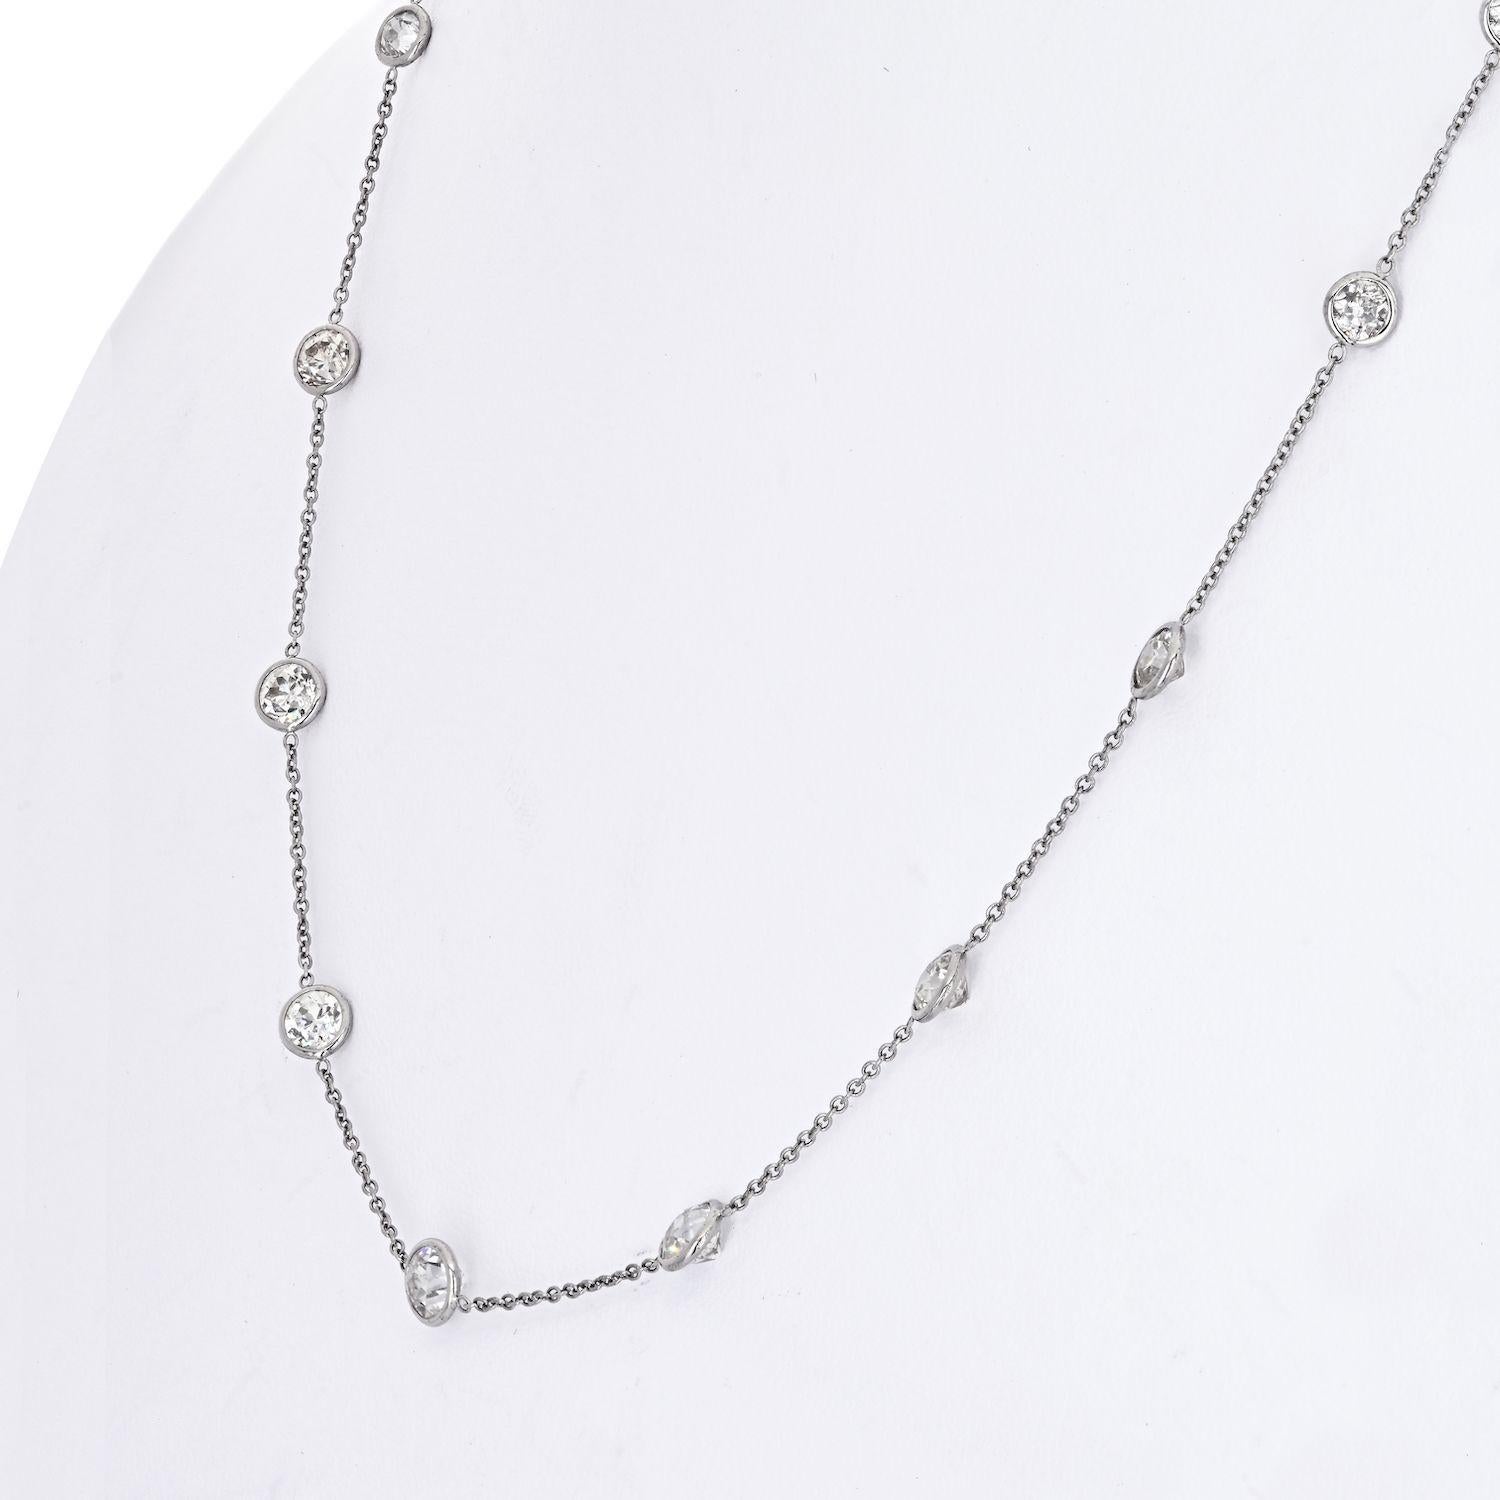 Platinum 5 carat Round Cut Diamonds by the Yard Necklace made with 17 round cut diamonds of fine color and clarity. 
16 inches long.
